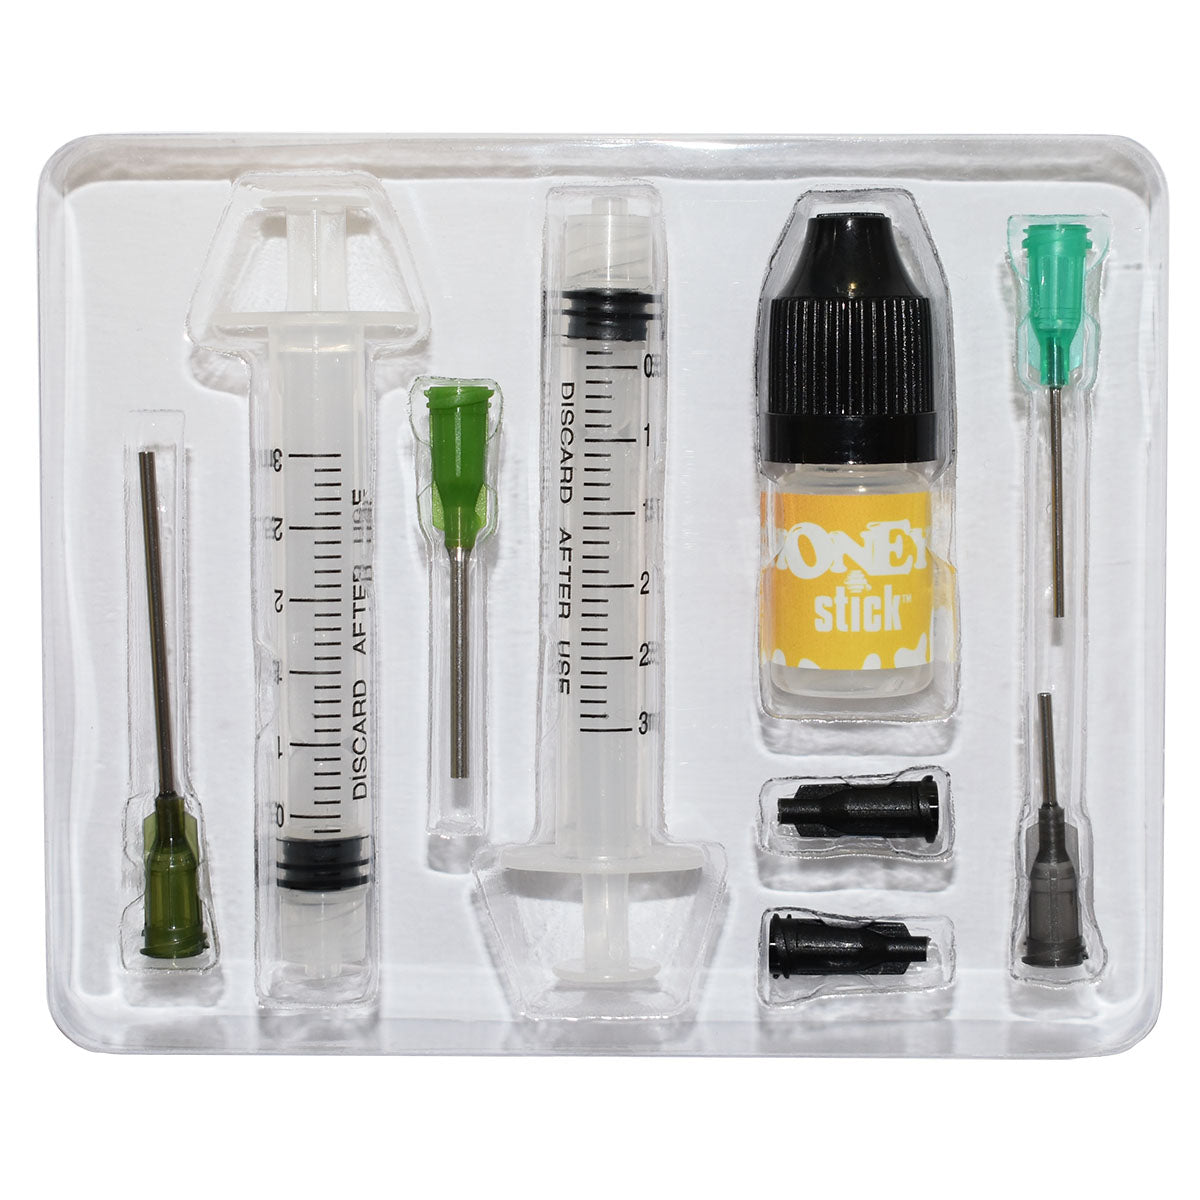 CartDub PLUS Kit To Open and Remove Oil from Cartridge